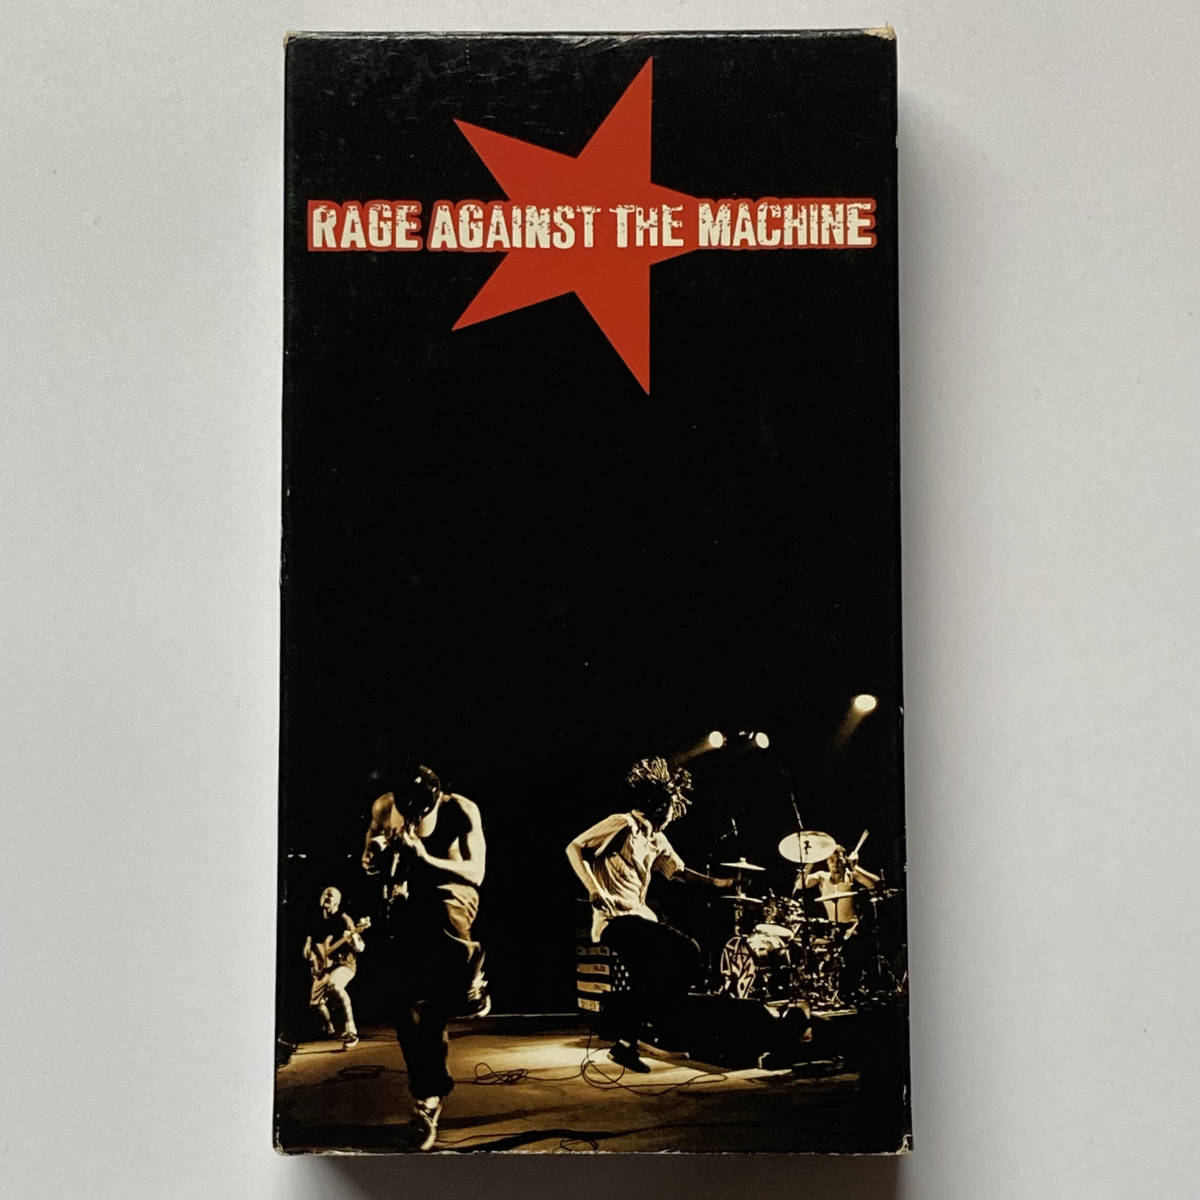 【RAGE AGAINST THE MACHINE*レイジ・アゲインスト・ザ・マシーン*VHSテープ*LIVE IN CONCERT VIDEO CLIPS*70分】_画像1